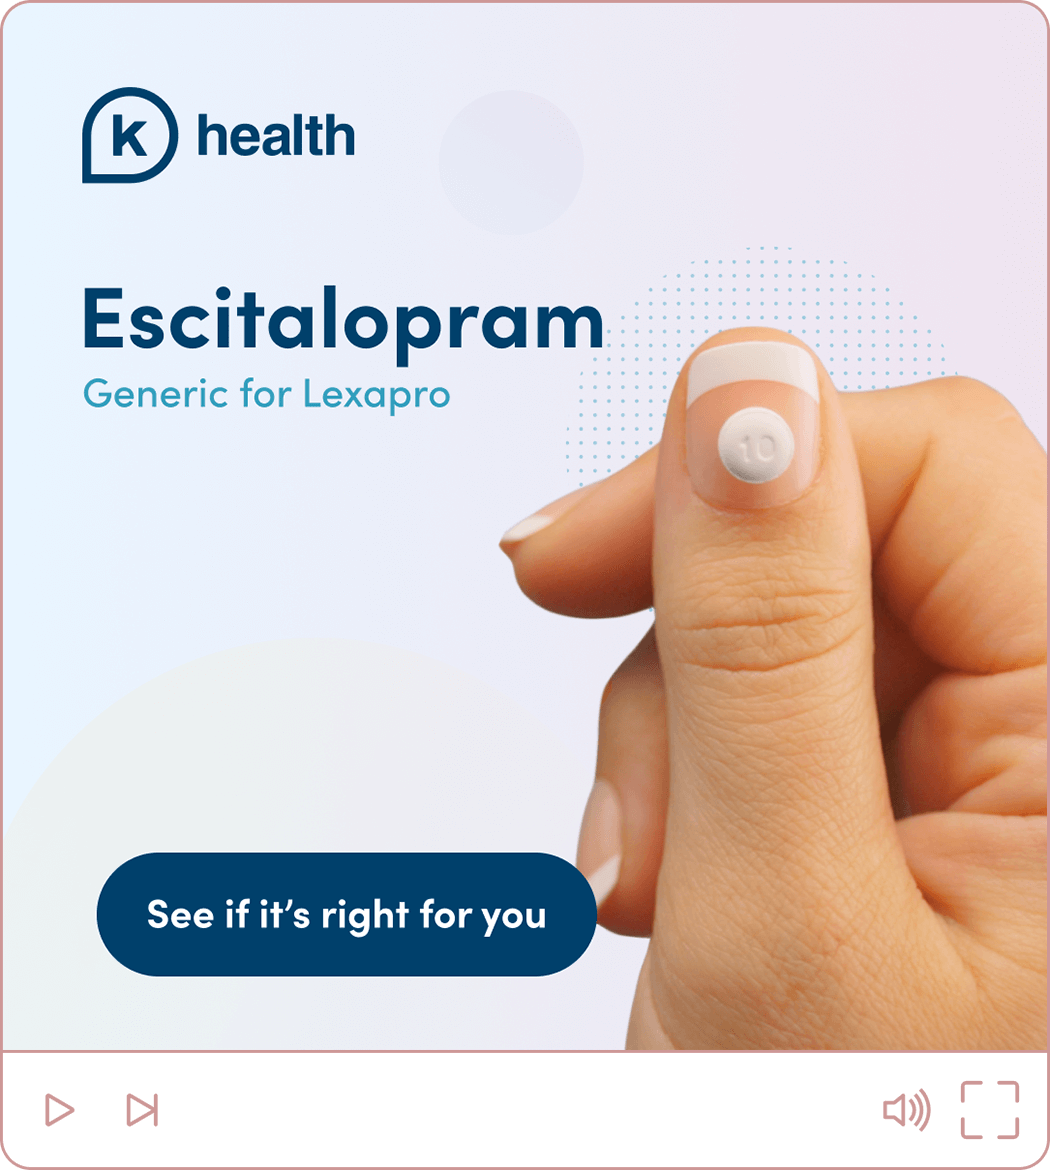 Ad for escitalopram featuring a hand holding a pill, the medication name, and the K Health logo